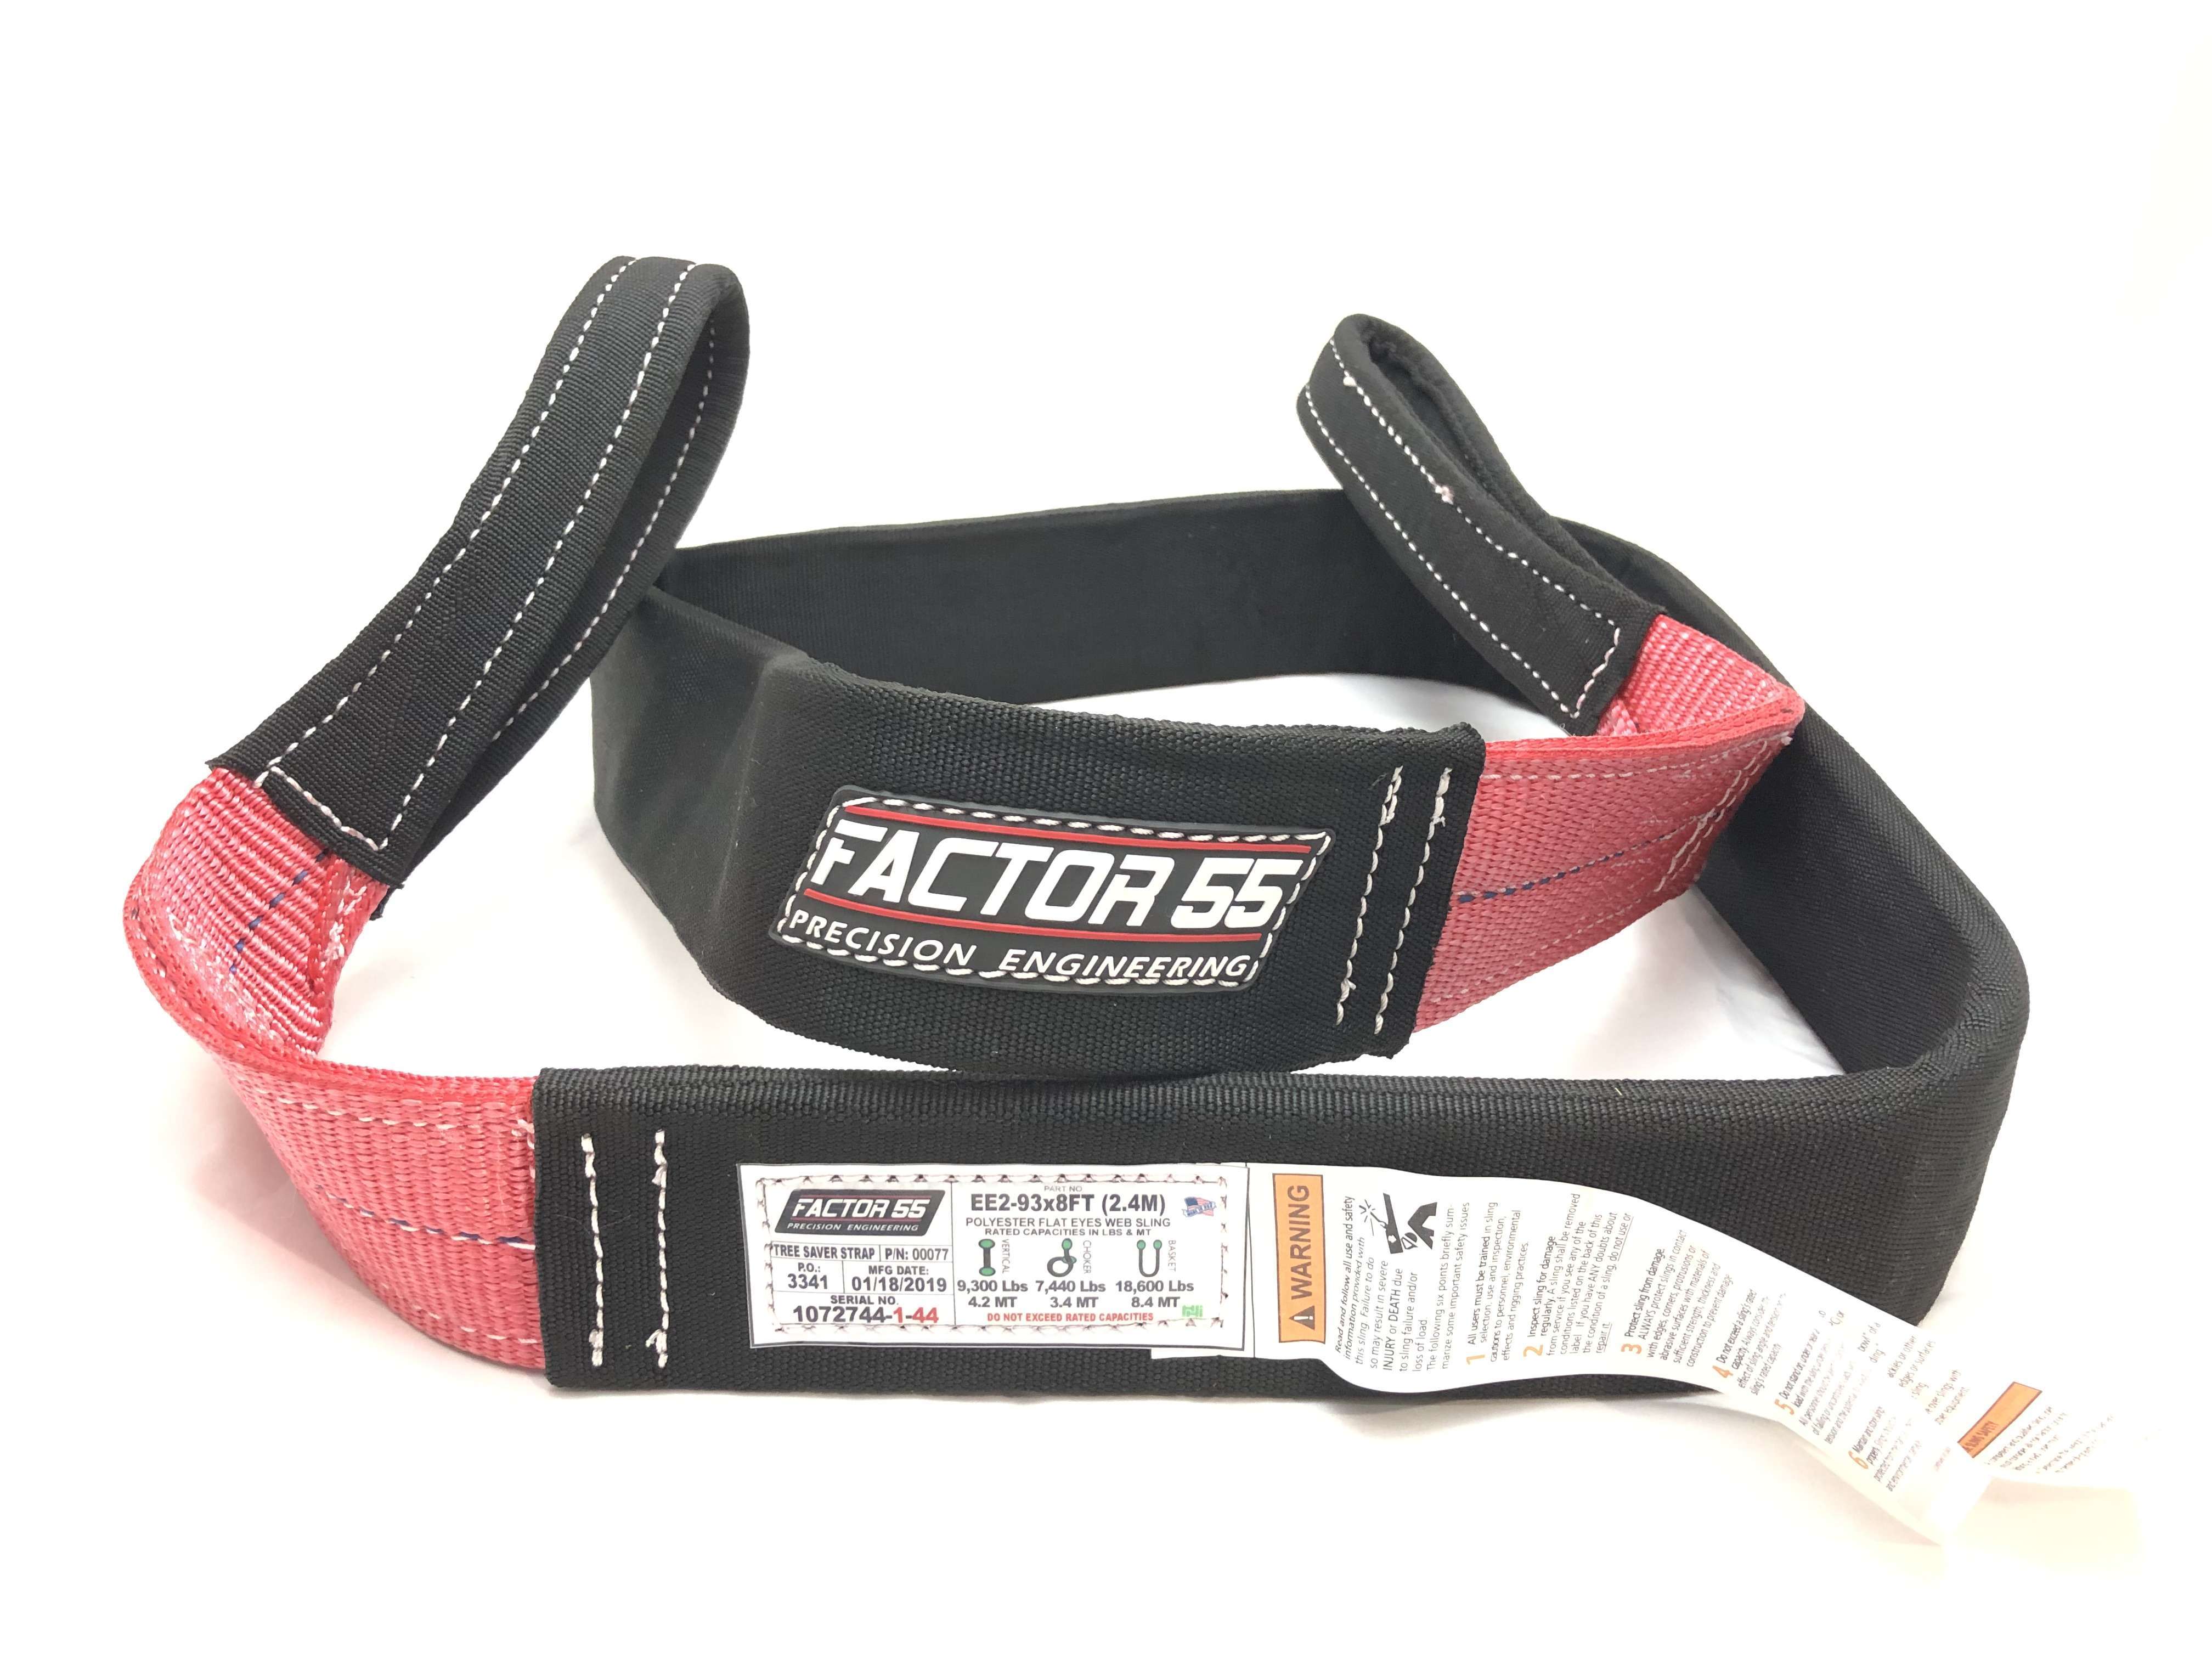 Tree Saver Strap Recovery Accessories Factor 55  display